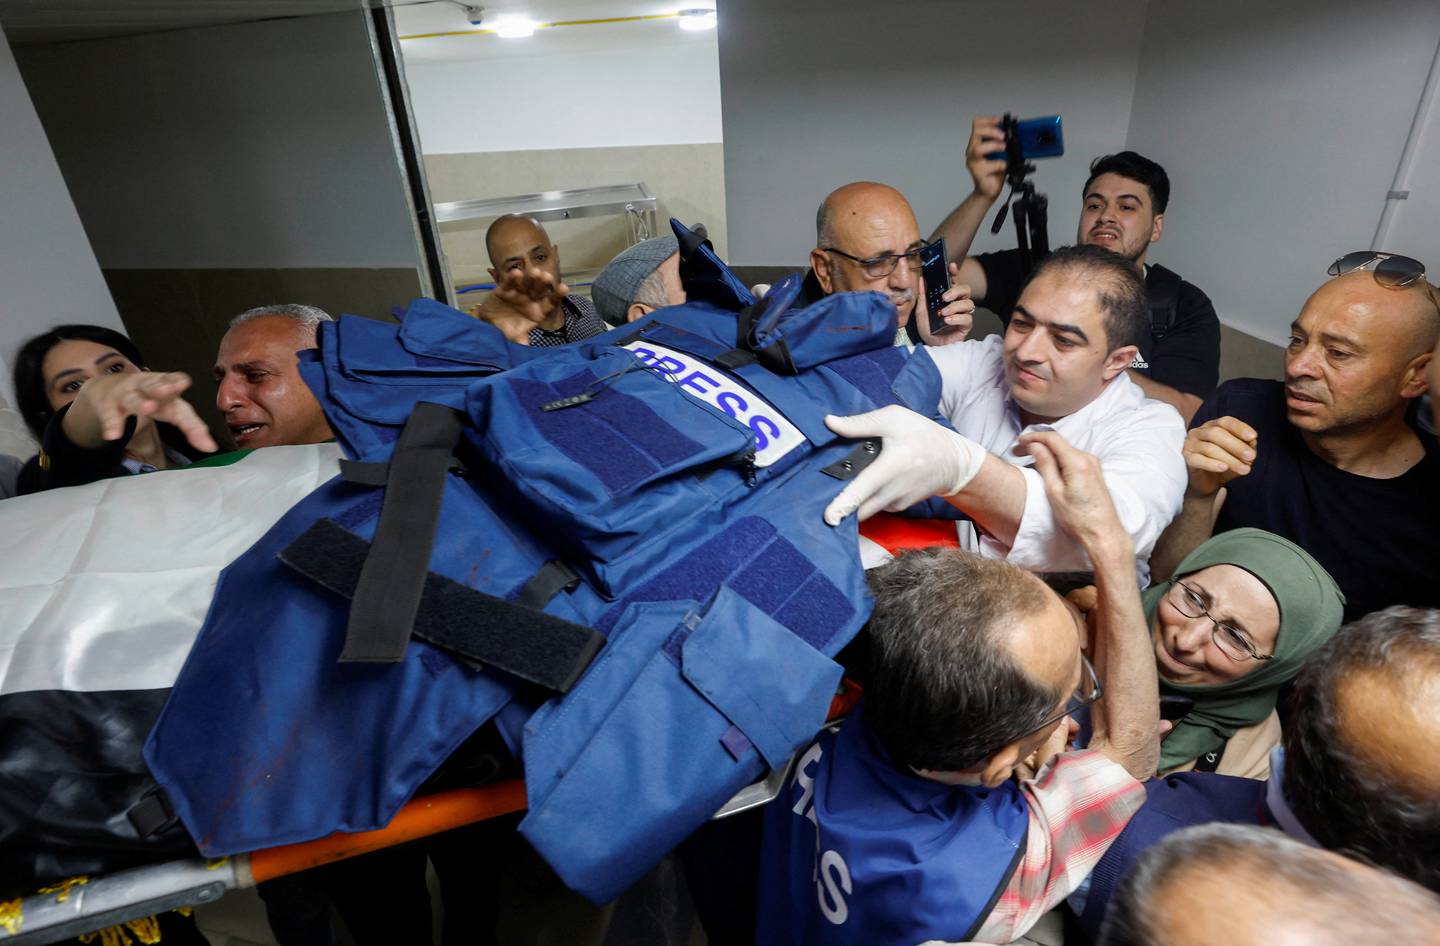 Mourners, including journalists, carry the body and flak jacket of Al Jazeera reporter Shireen Abu Akleh. Reuters